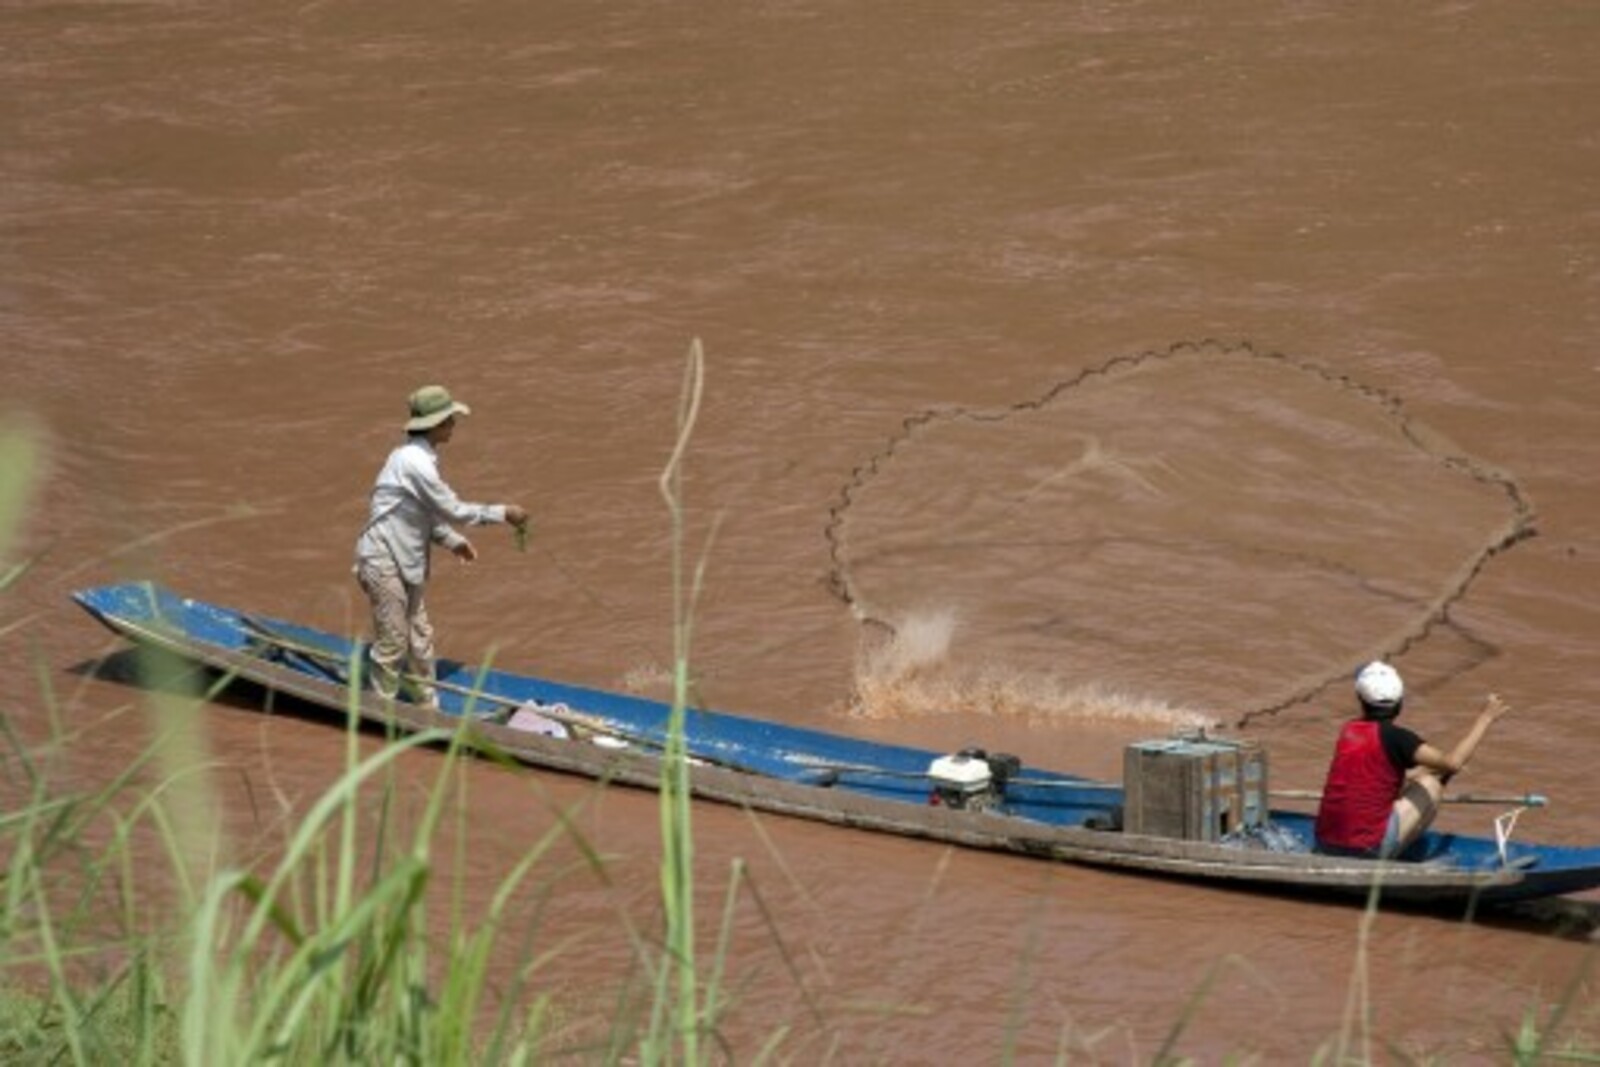 As the country the holds the largest percentage of the Mekong River, Laos relies heavily on the river's steady flow for food supply, such as fishing pictured above as well as electricity and transportation.